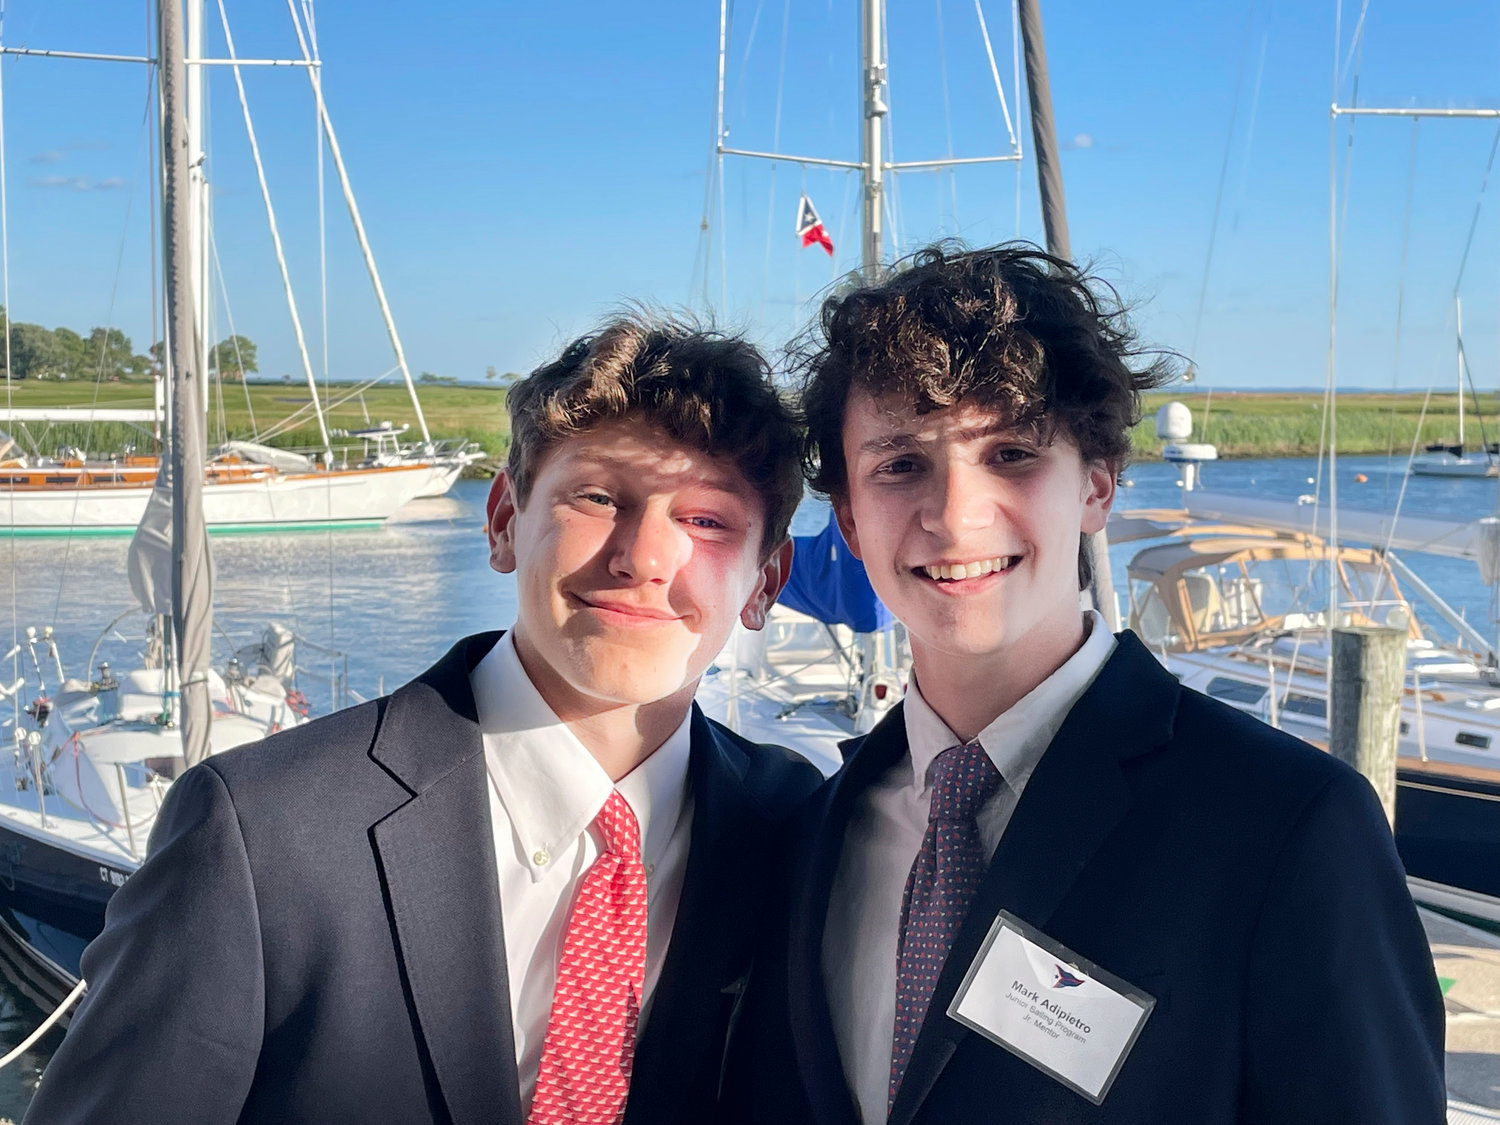 Tucker Peters, left, and Mark Adipietro are passionate about sailing. They are also close friends.